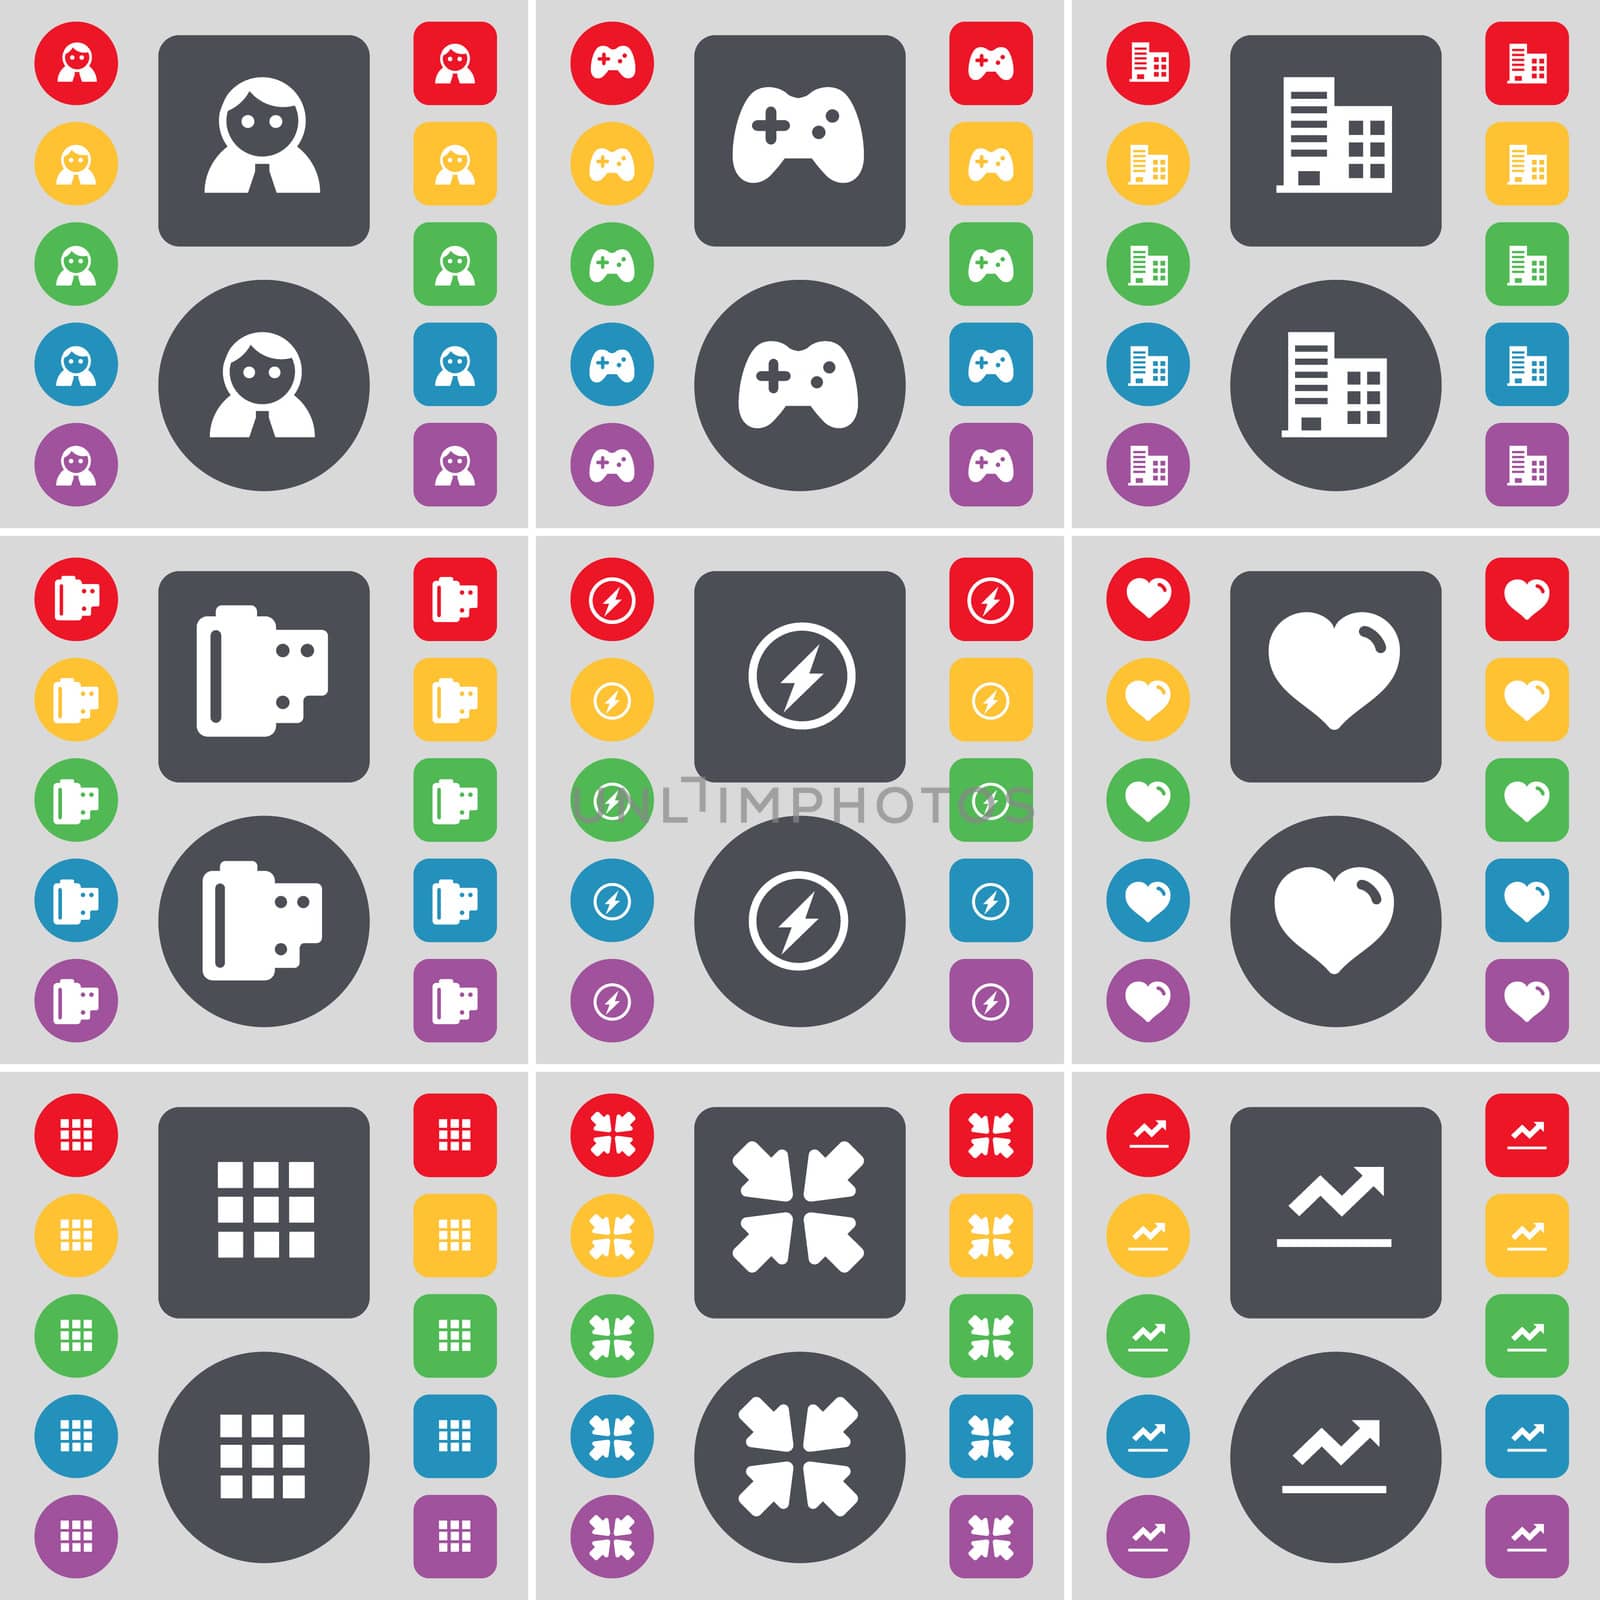 Avatar, Gamepad, Building, Negative films, Flash, Heart, Apps, Deploying screen, Graph icon symbol. A large set of flat, colored buttons for your design. illustration